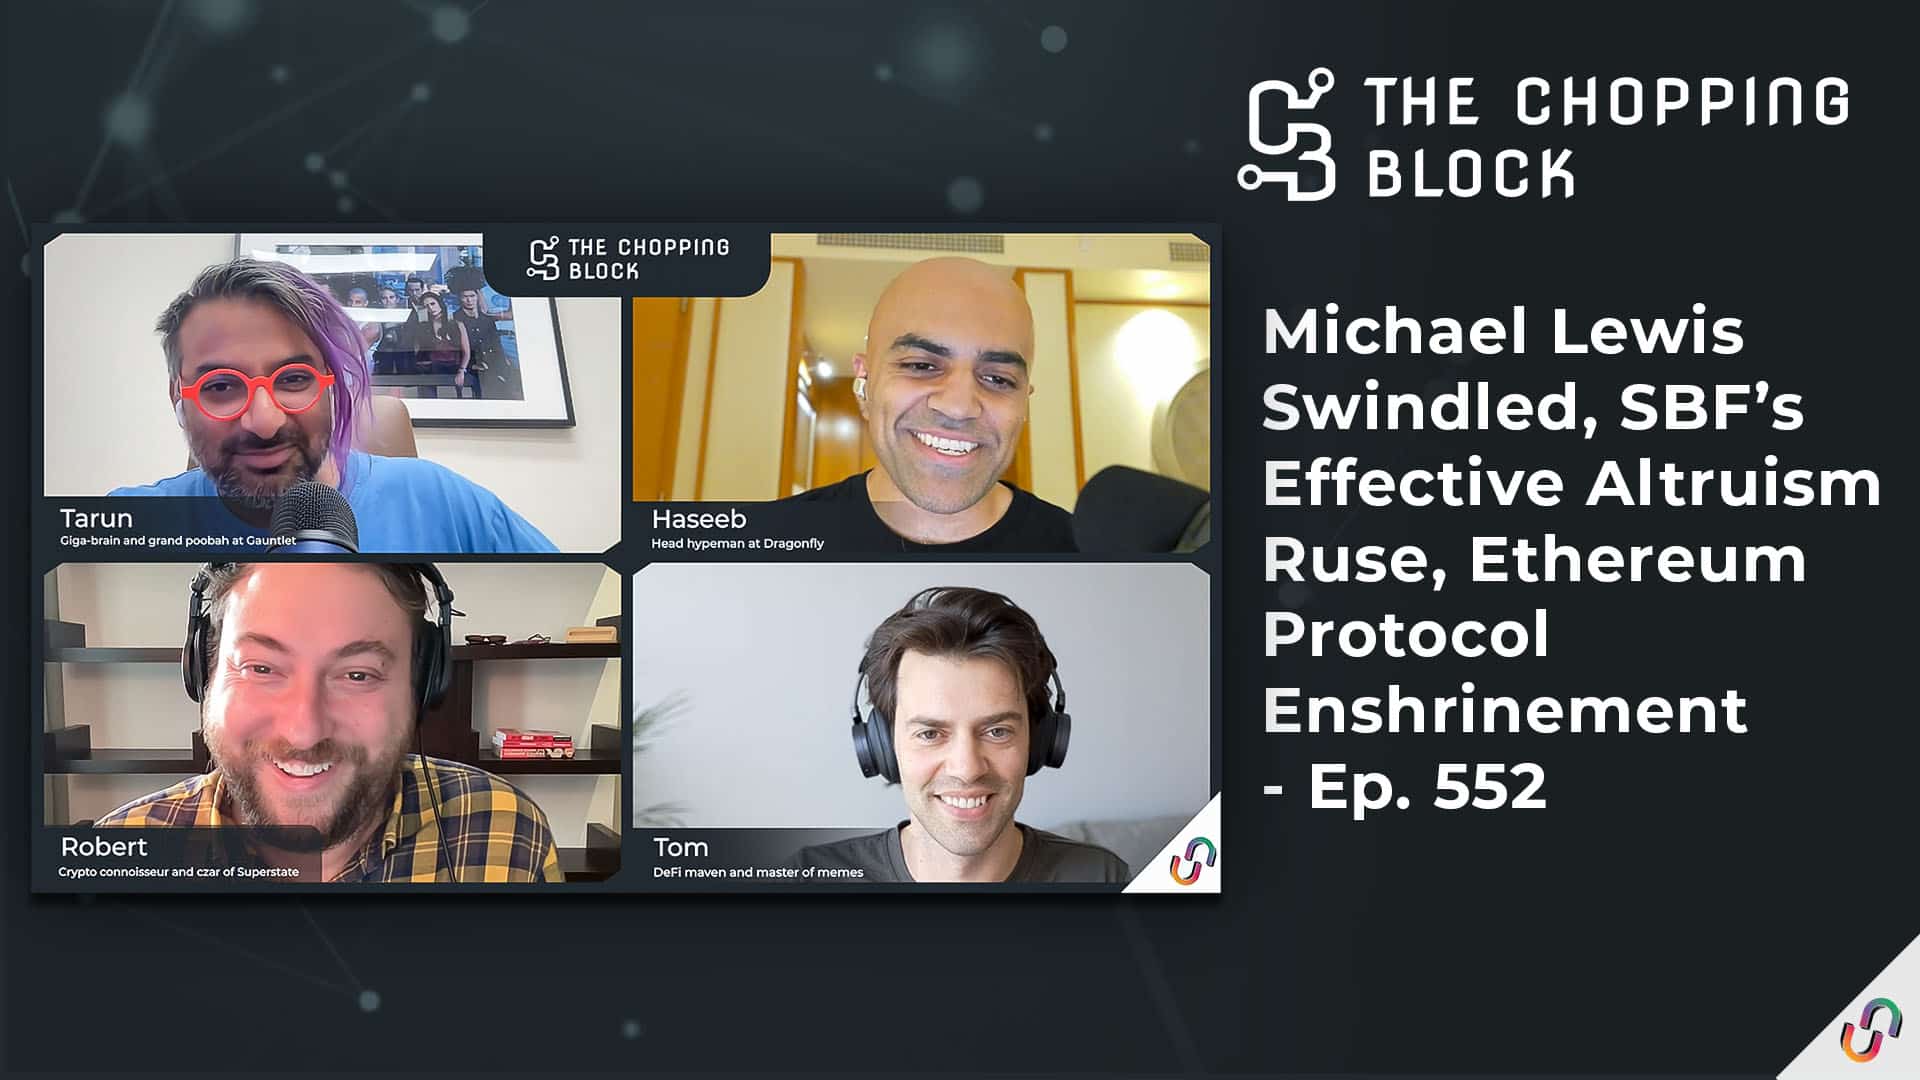 The Chopping Block: Michael Lewis Swindled, SBF’s Effective Altruism Ruse, Ethereum Protocol Enshrinement - Ep. 552